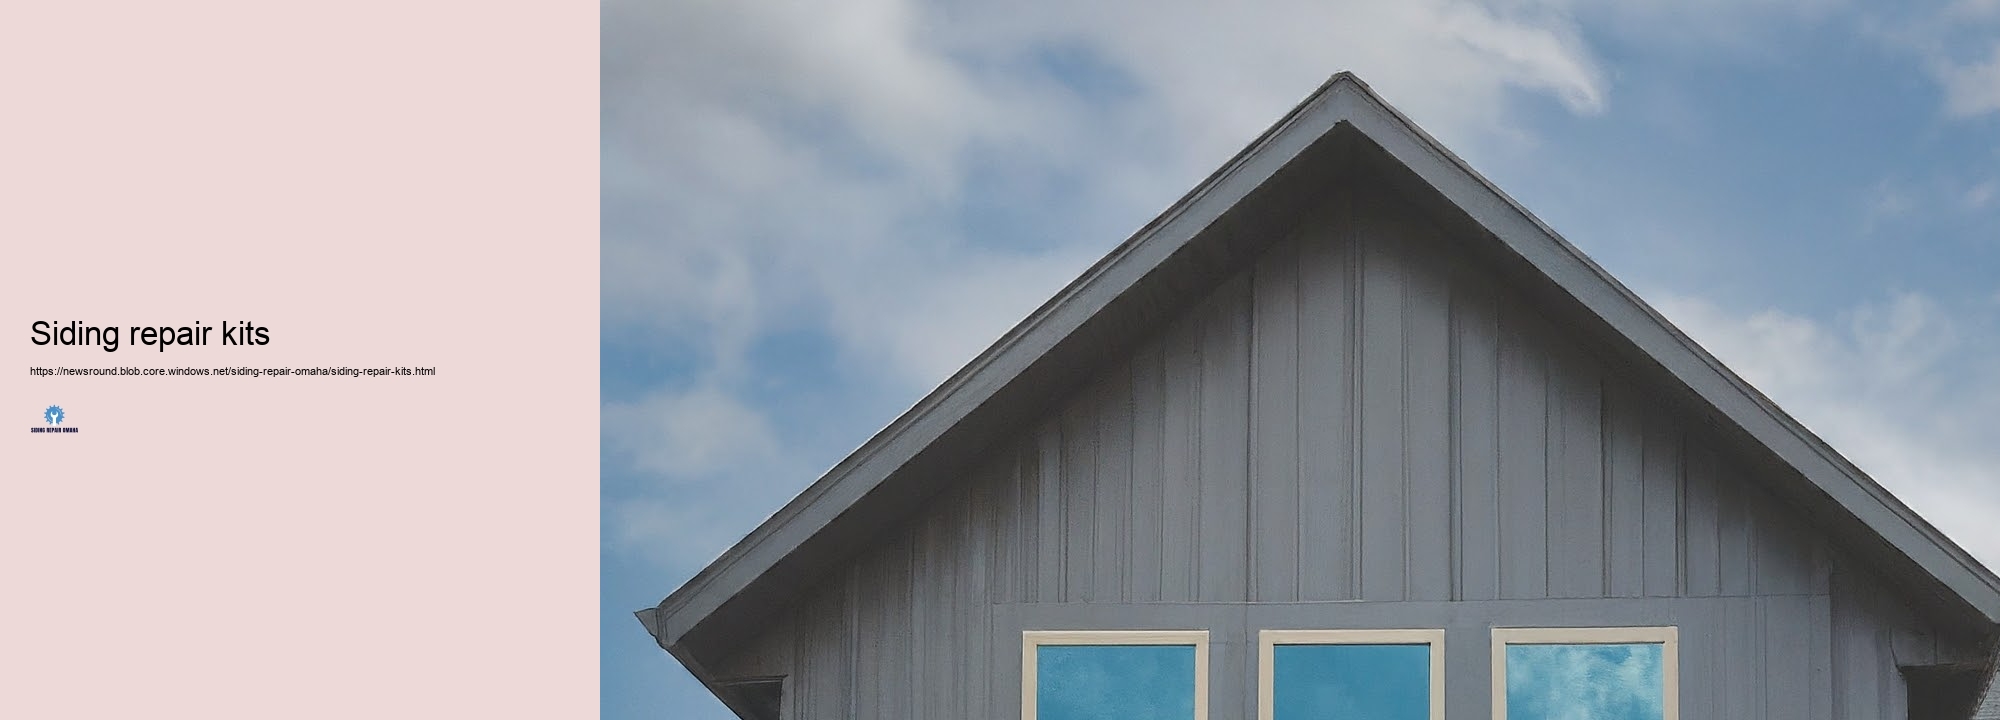 Exactly just how to Protect Your Home Exterior siding: Tips from Omaha Professionals